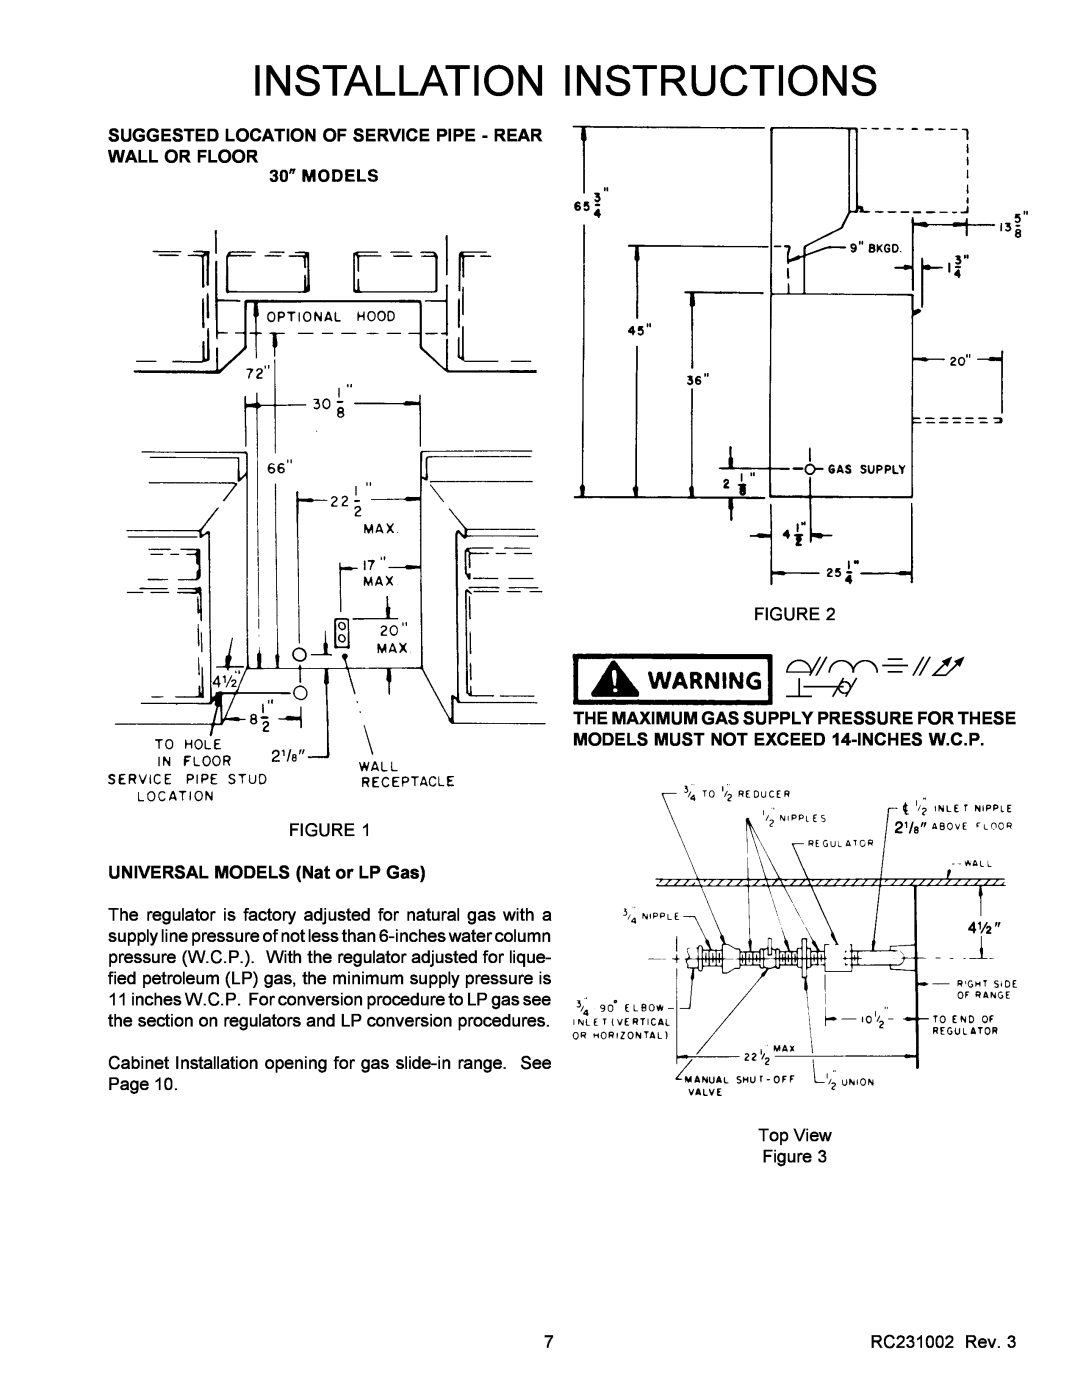 Amana RSS, RST service manual Installation Instructions, Suggested Location Of Service Pipe - Rear Wall Or Floor 